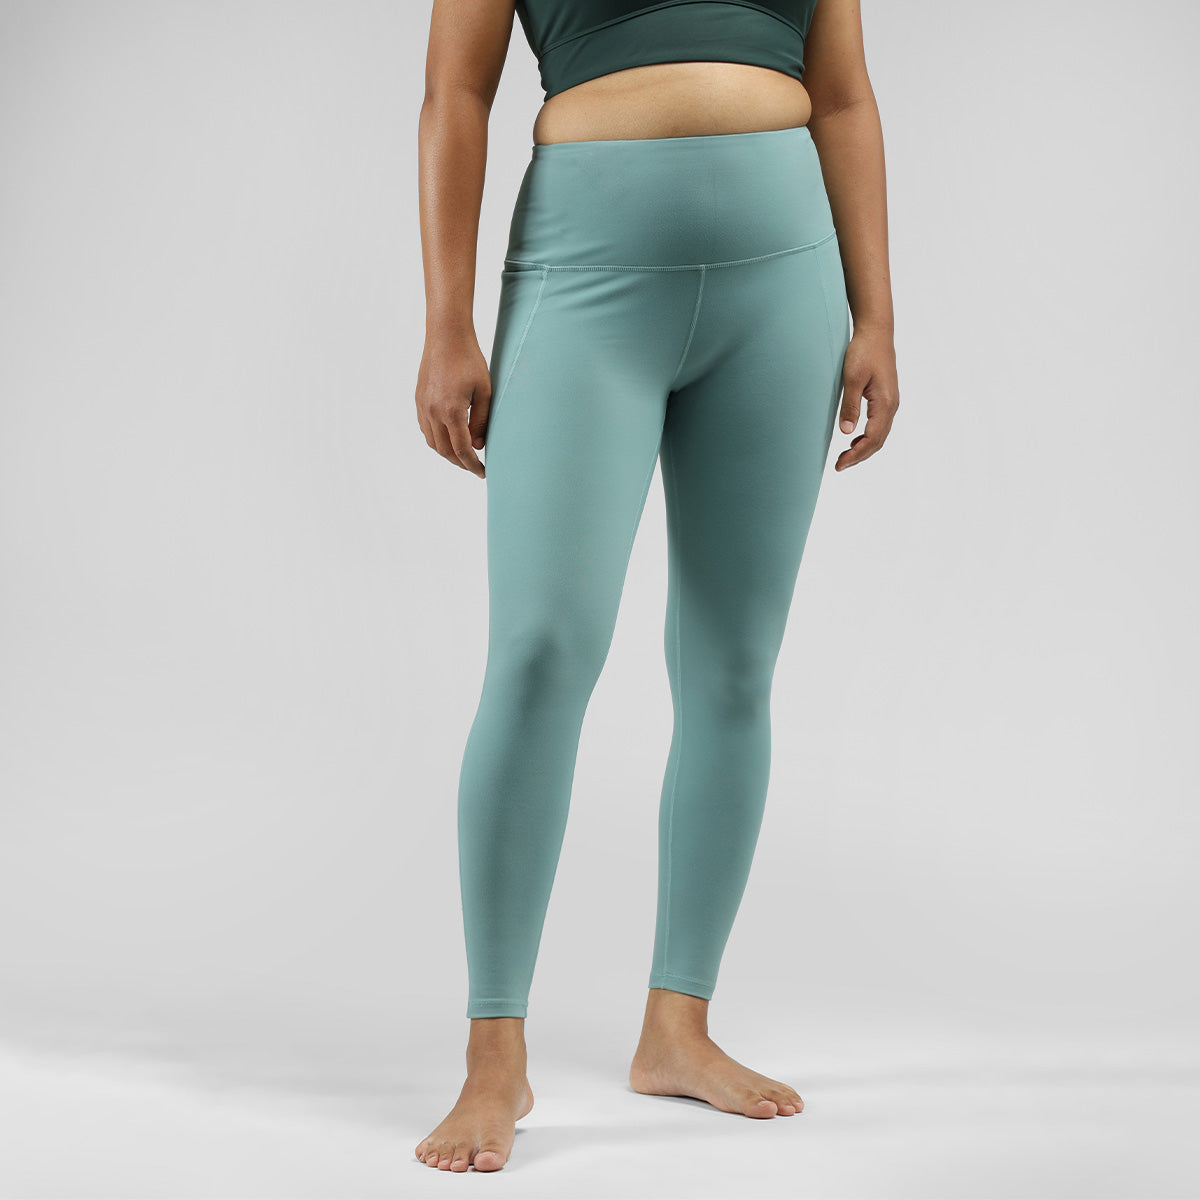 What's the Hype about *Bliss Club* Ultimate Leggings? Hit or Miss